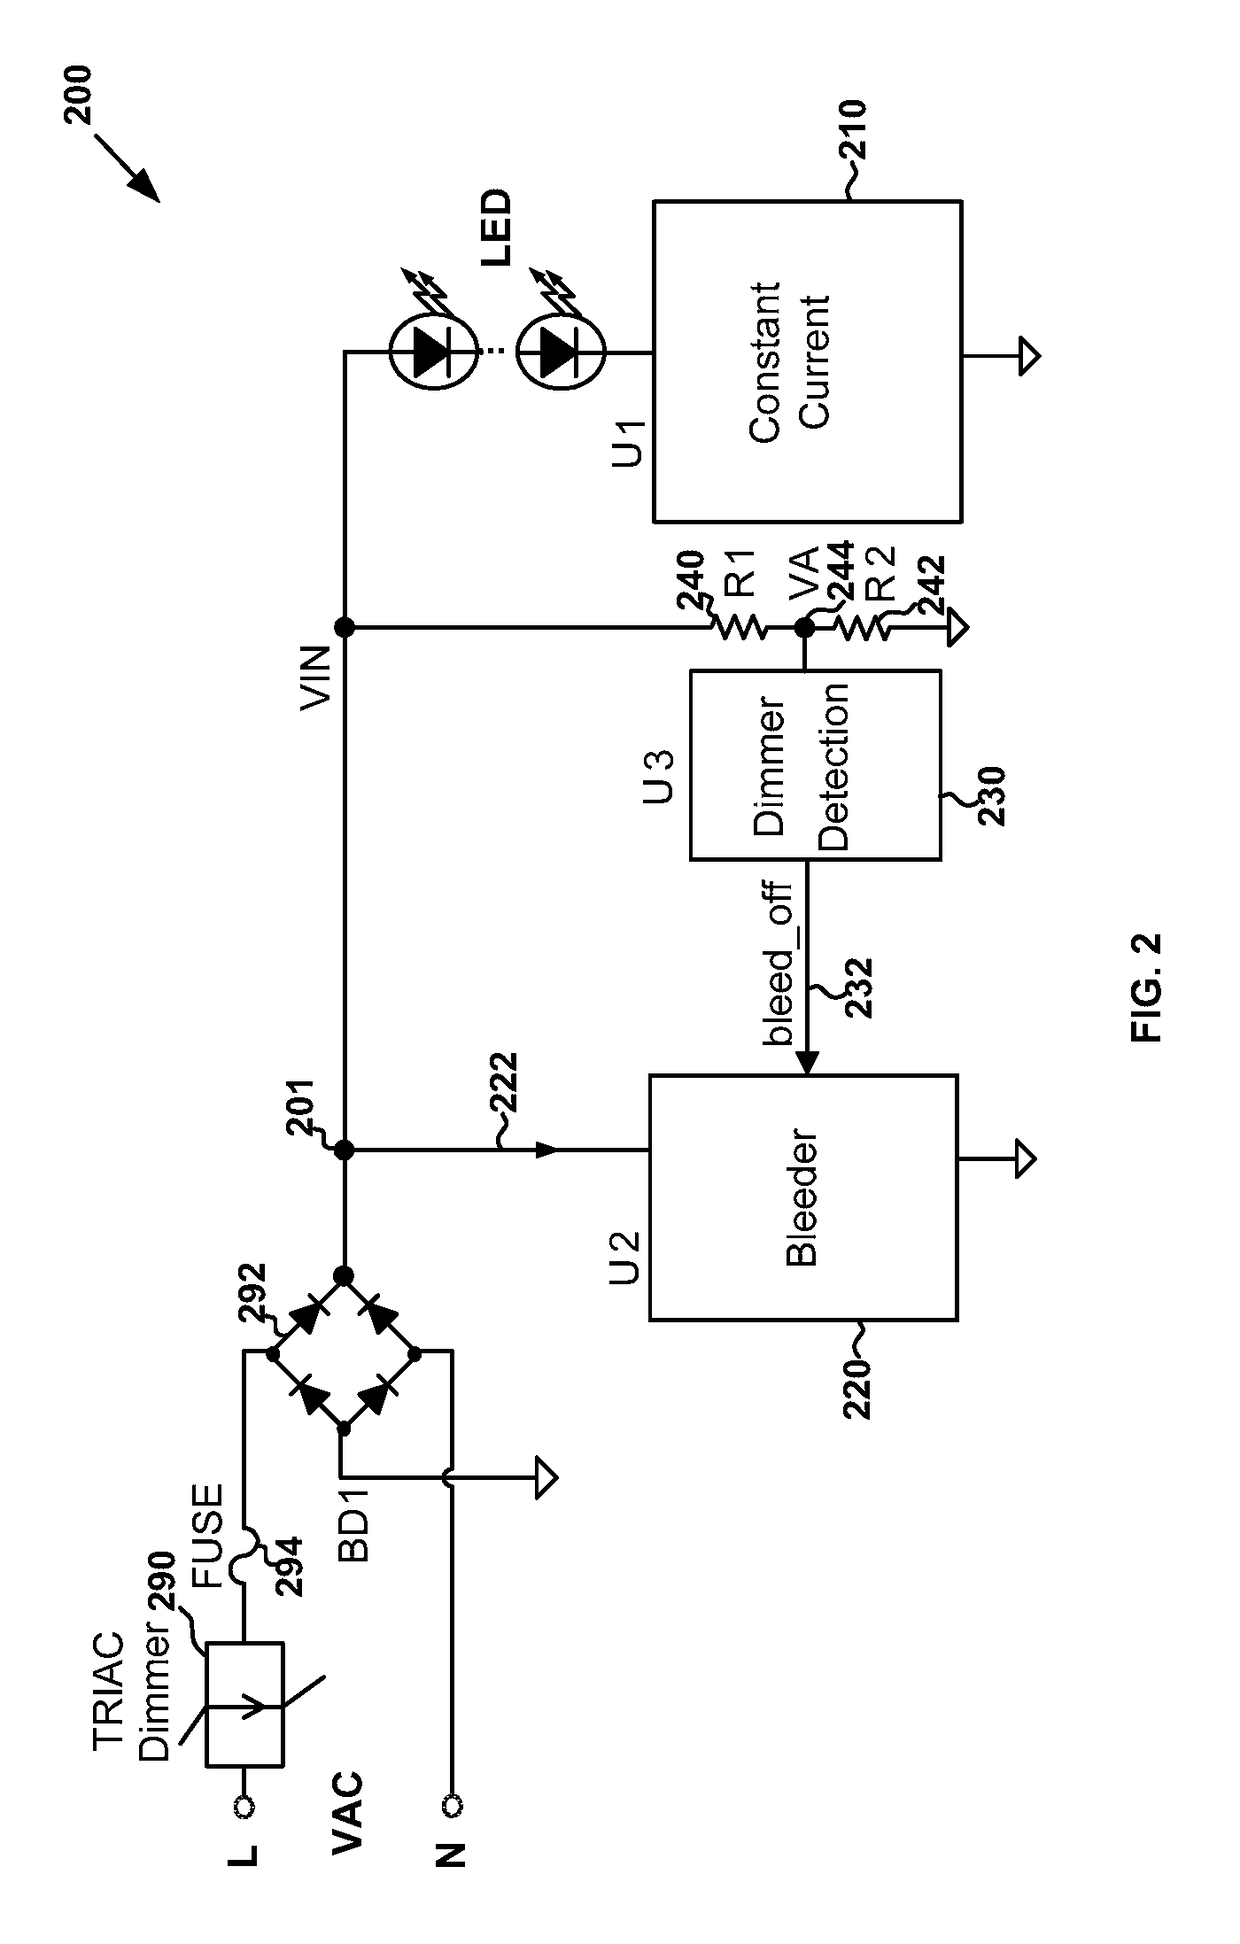 Systems and methods for bleeder control related to lighting emitting diodes